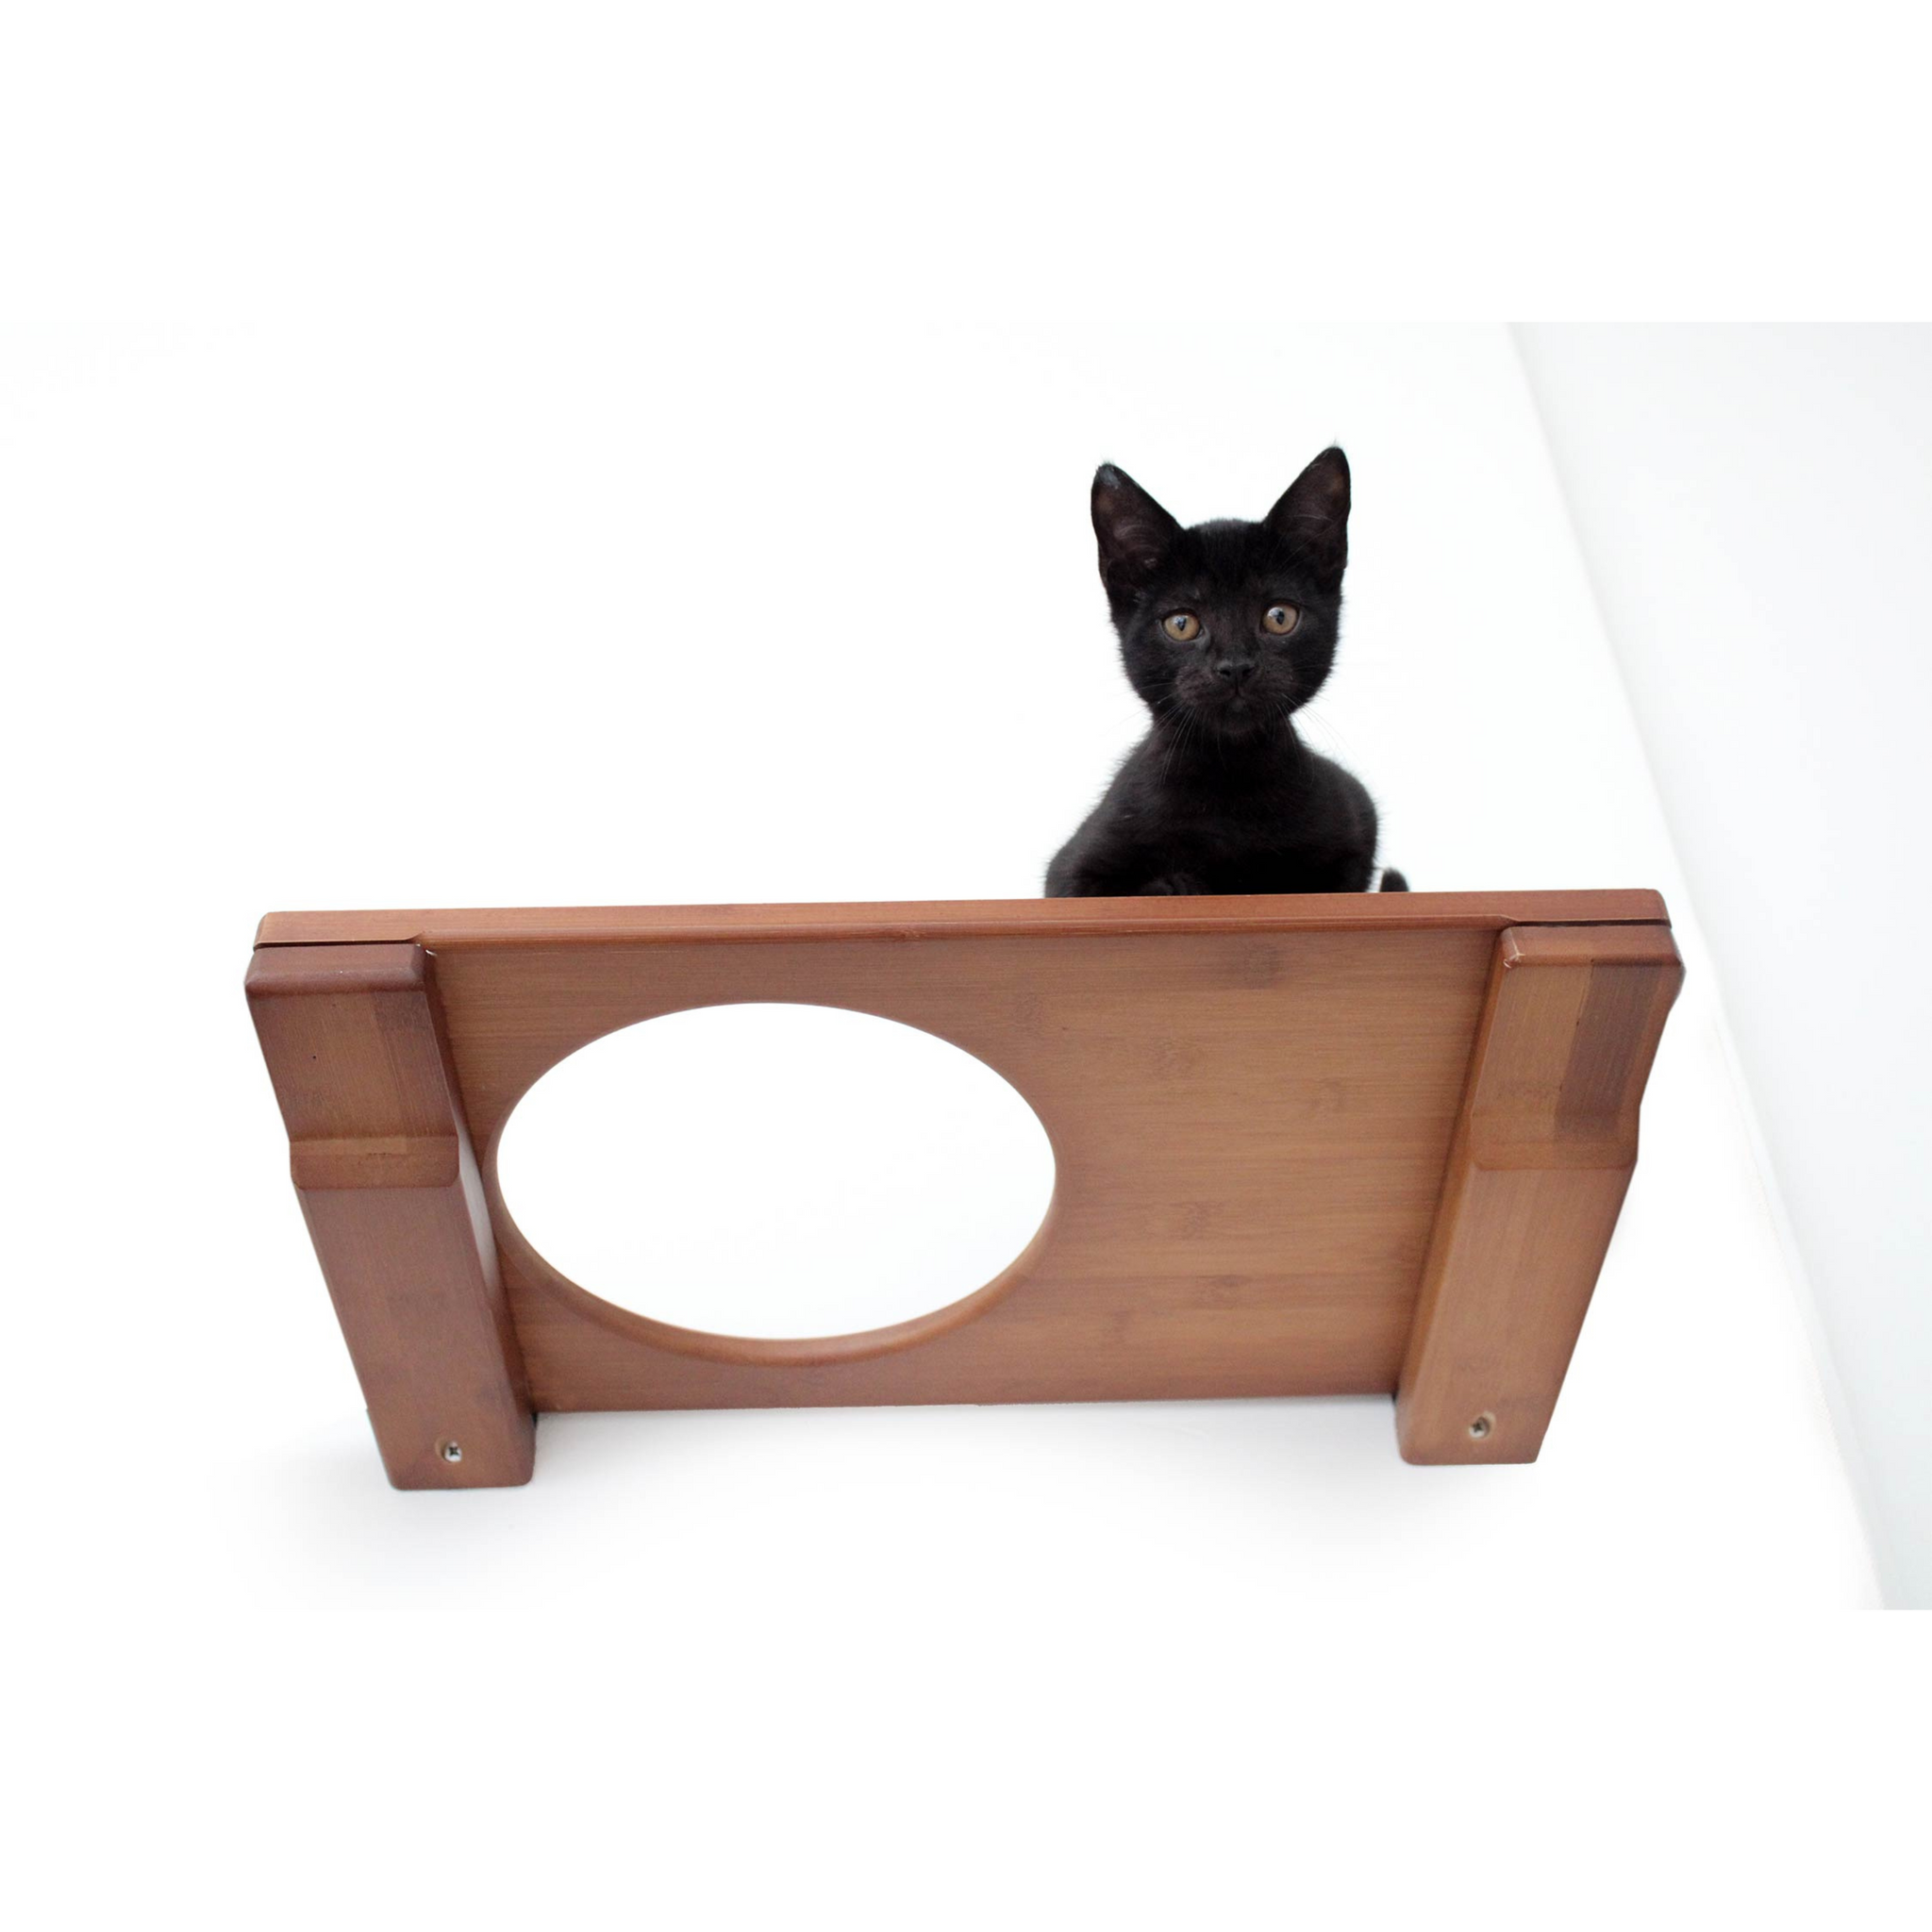 Wall-Mounted Cat Shelf by Catastrophic Creations